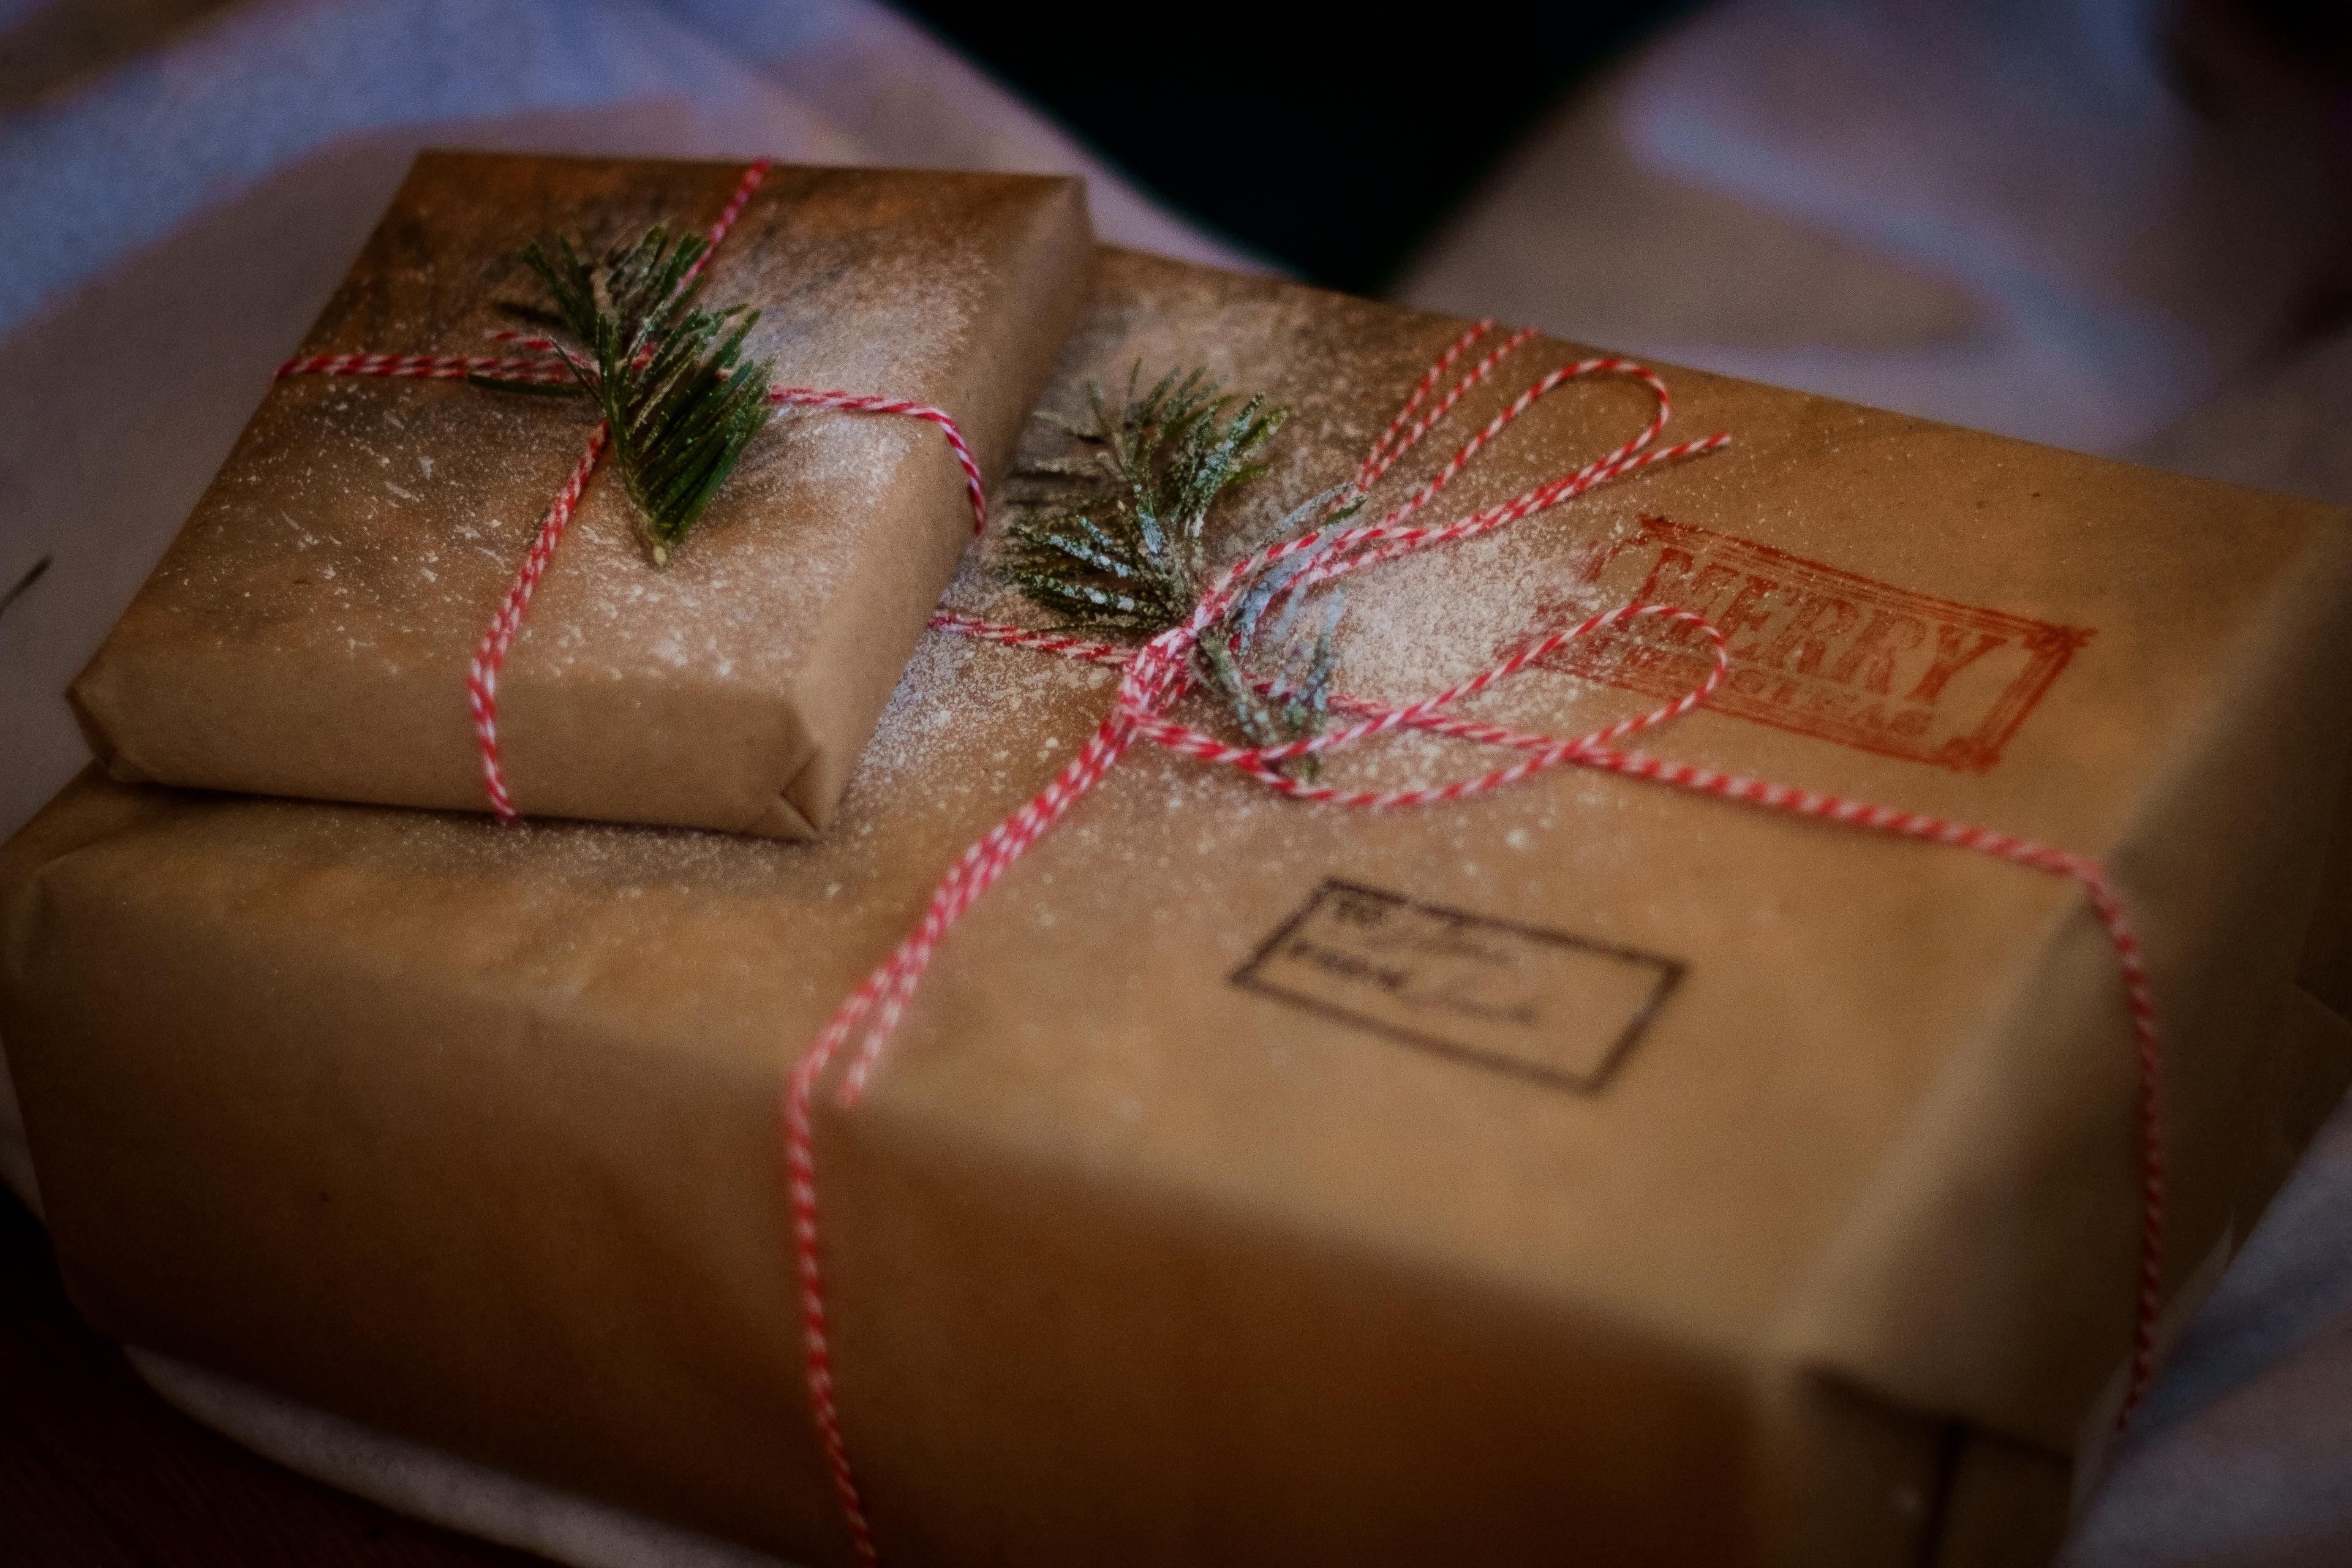 Two gifts wrapped in brown paper and tied with red-and-white string, each adorned with a small green sprig, suggesting a festive holiday theme.